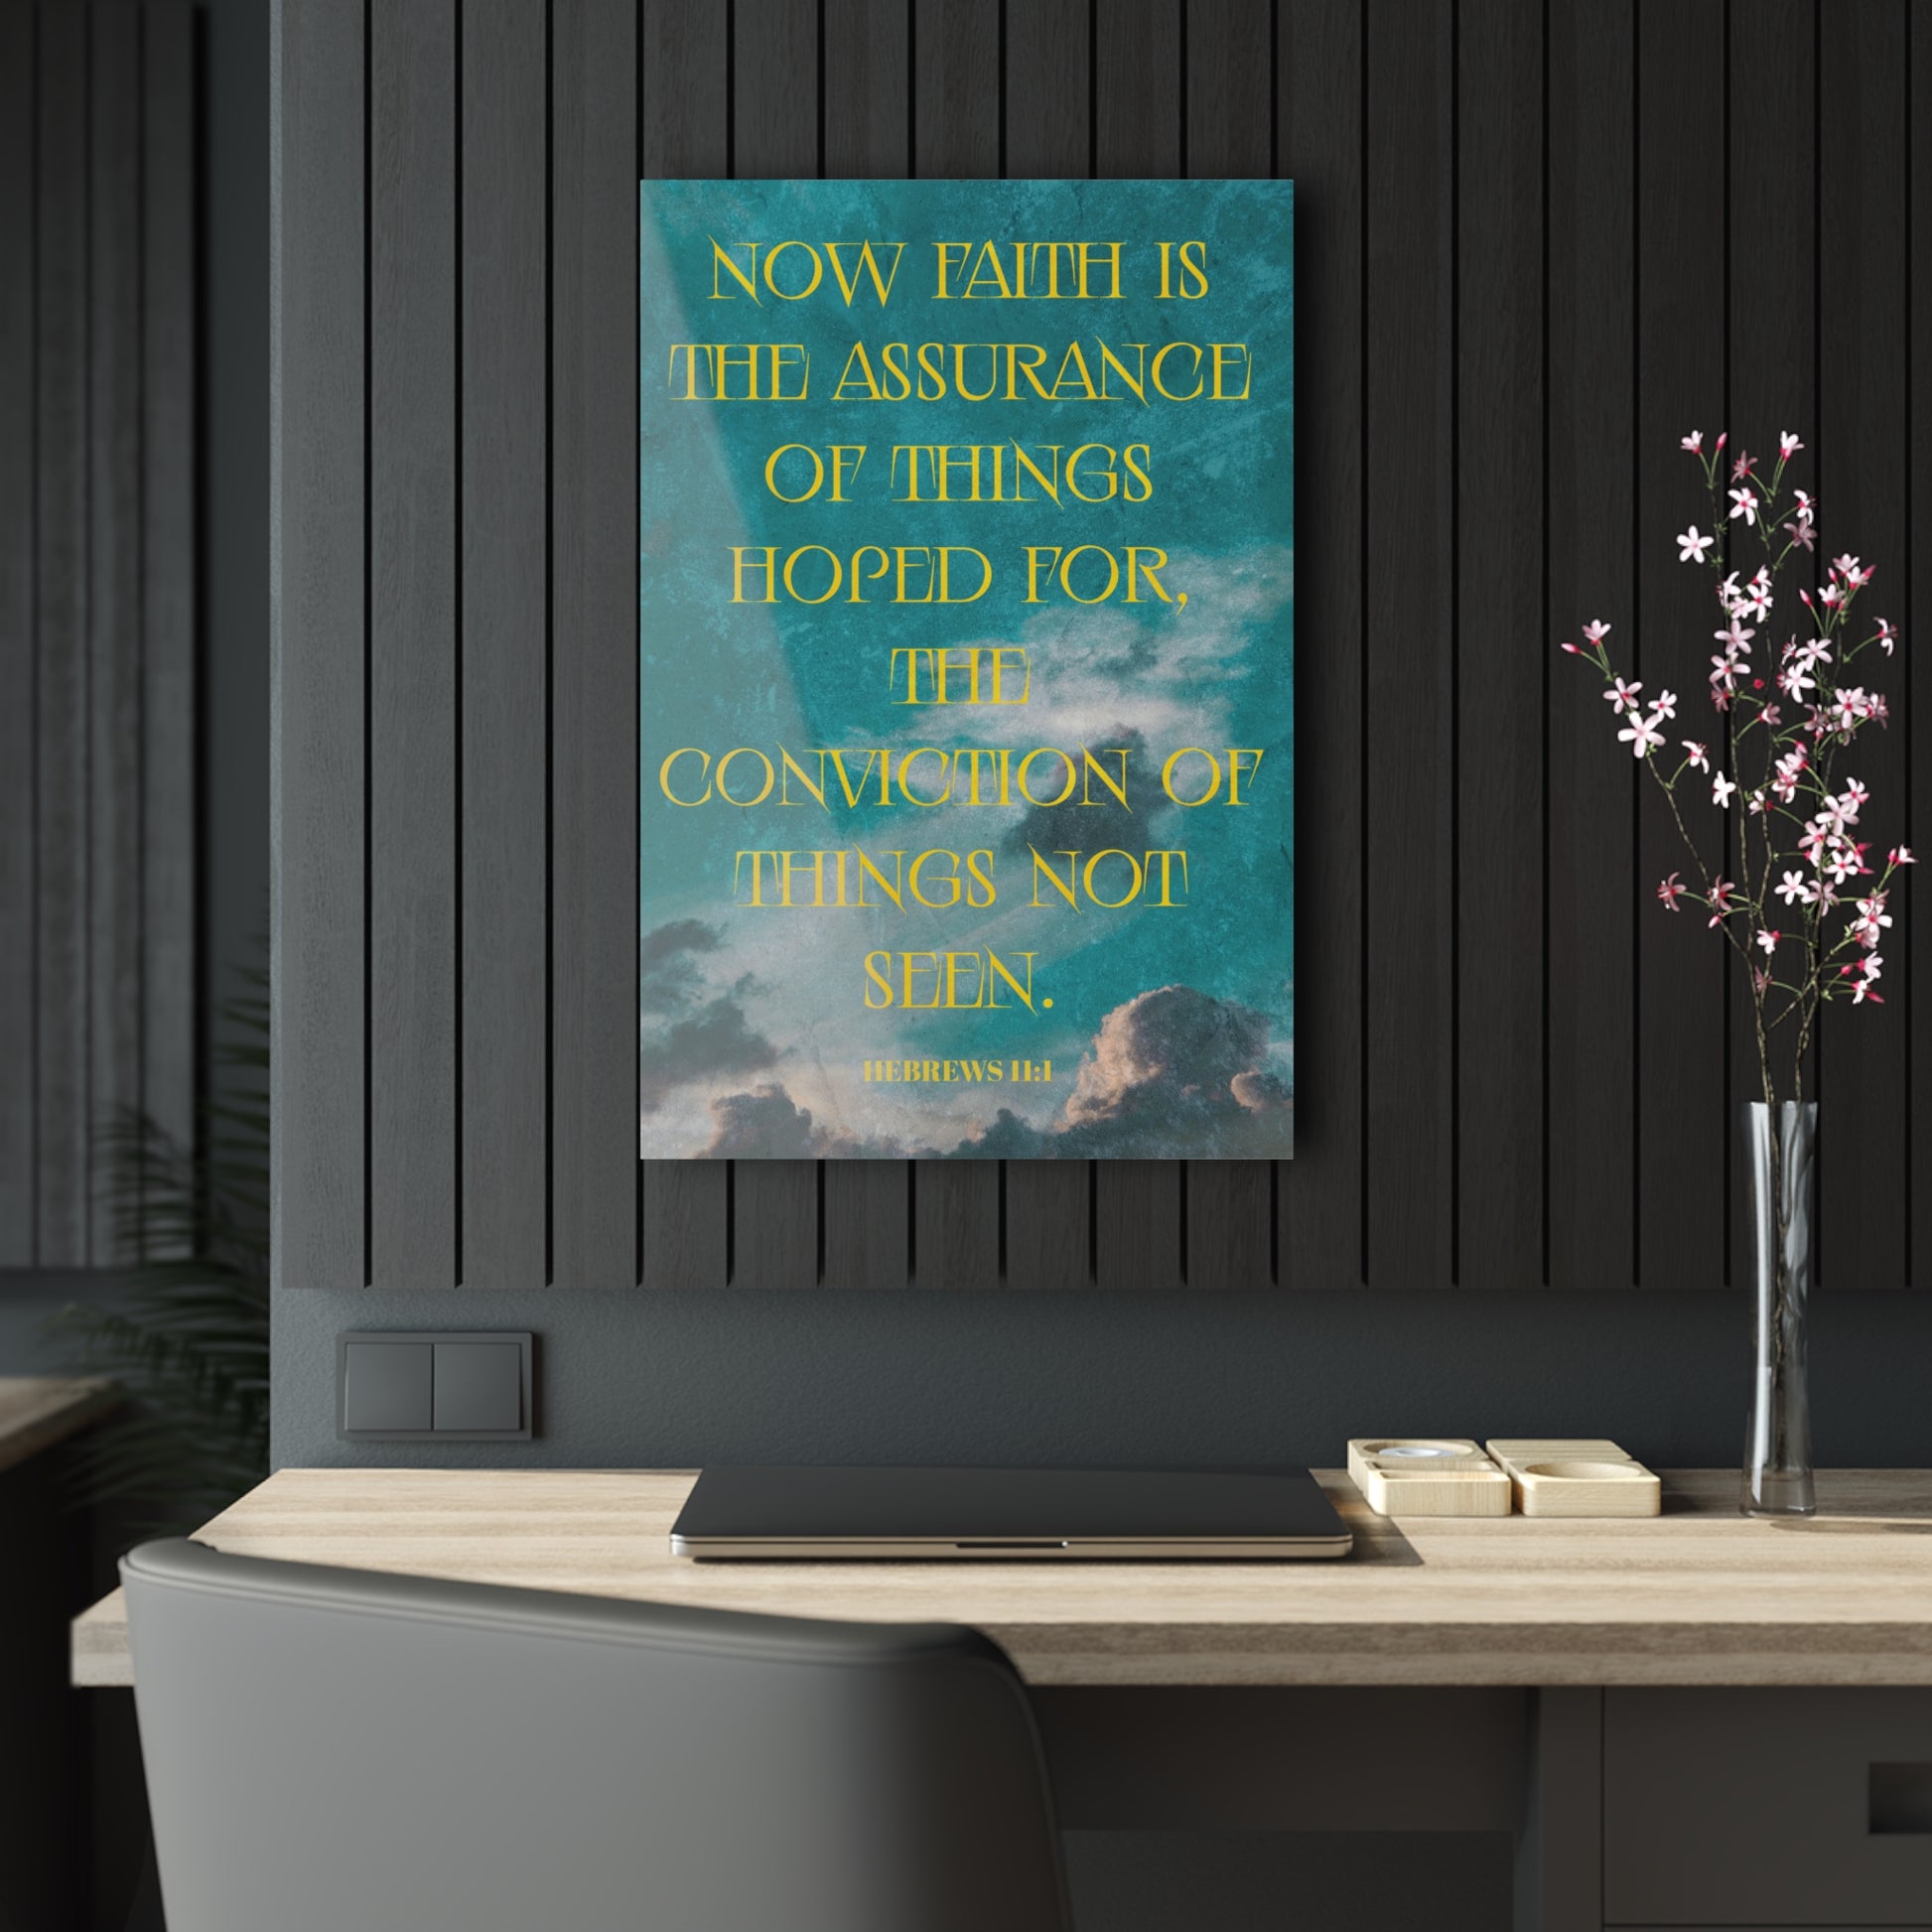 Bible Quote Large Bathroom Wall Art | Faith Assurance | Art & Wall Decor,Assembled in the USA,Assembled in USA,Decor,Home & Living,Home Decor,Indoor,Made in the USA,Made in USA,Poster